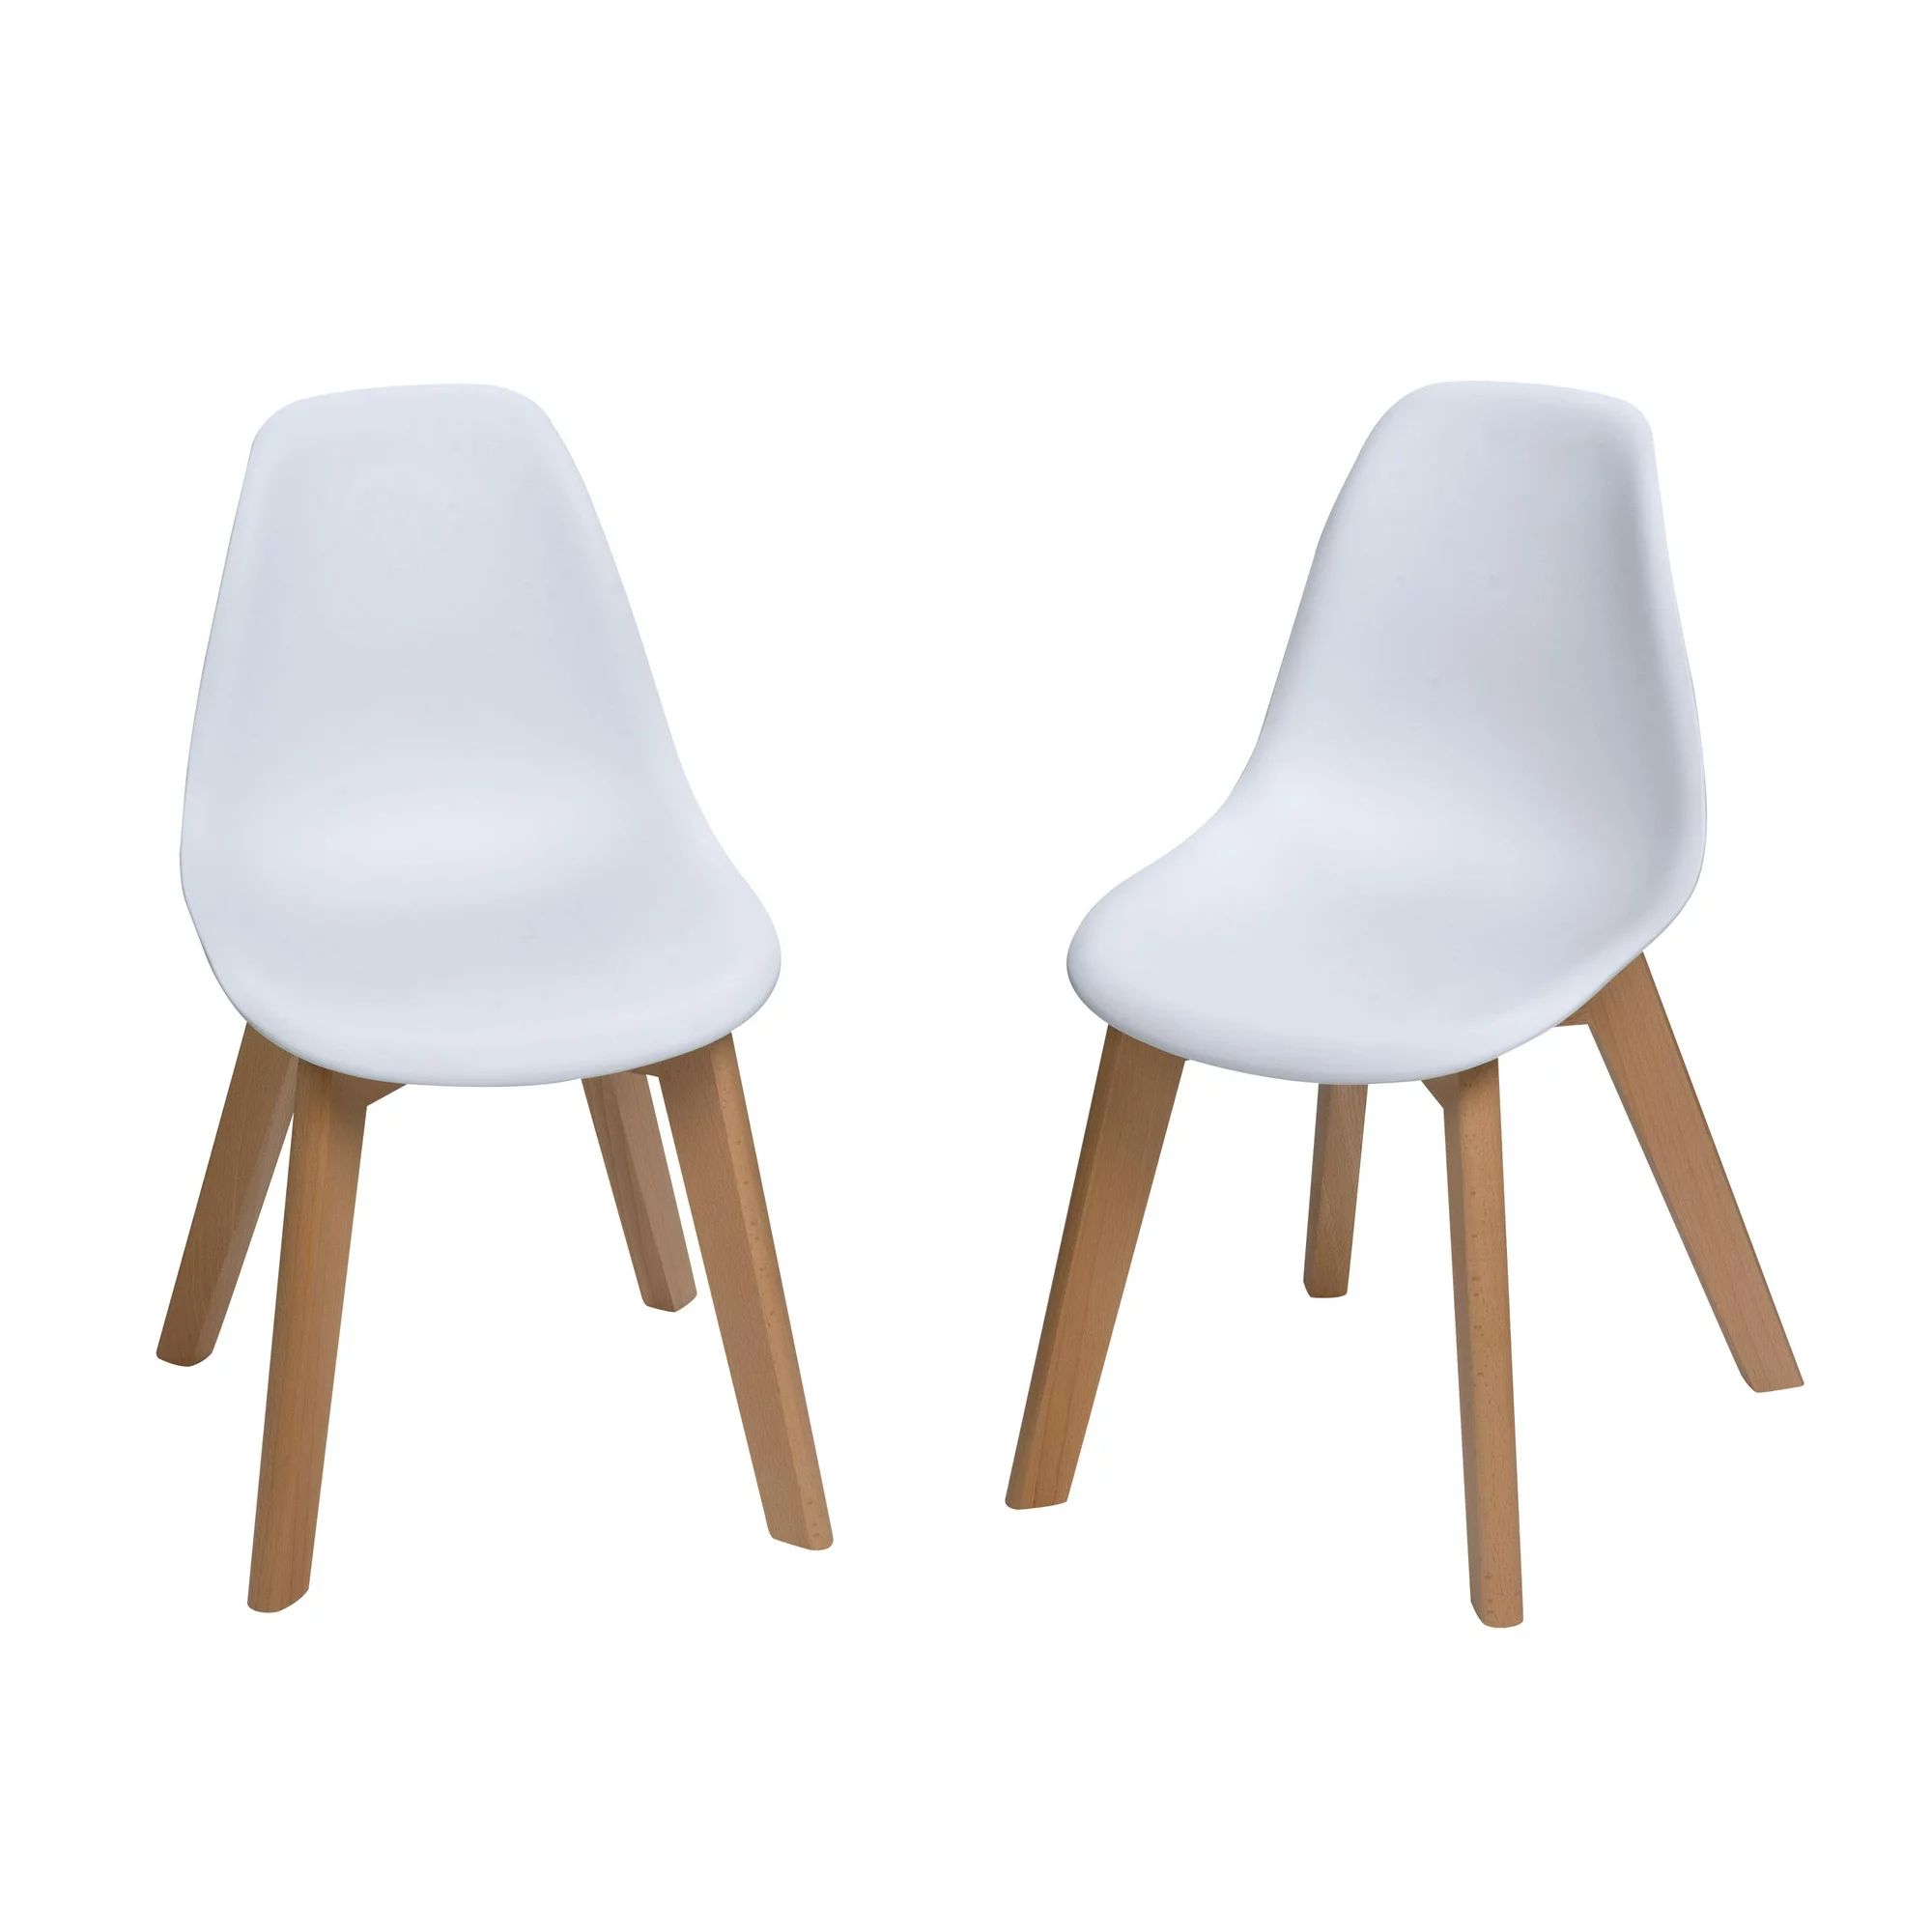 Modern Kids Chairs with Beech Legs (Set of 2 White Chairs) | Walmart (US)